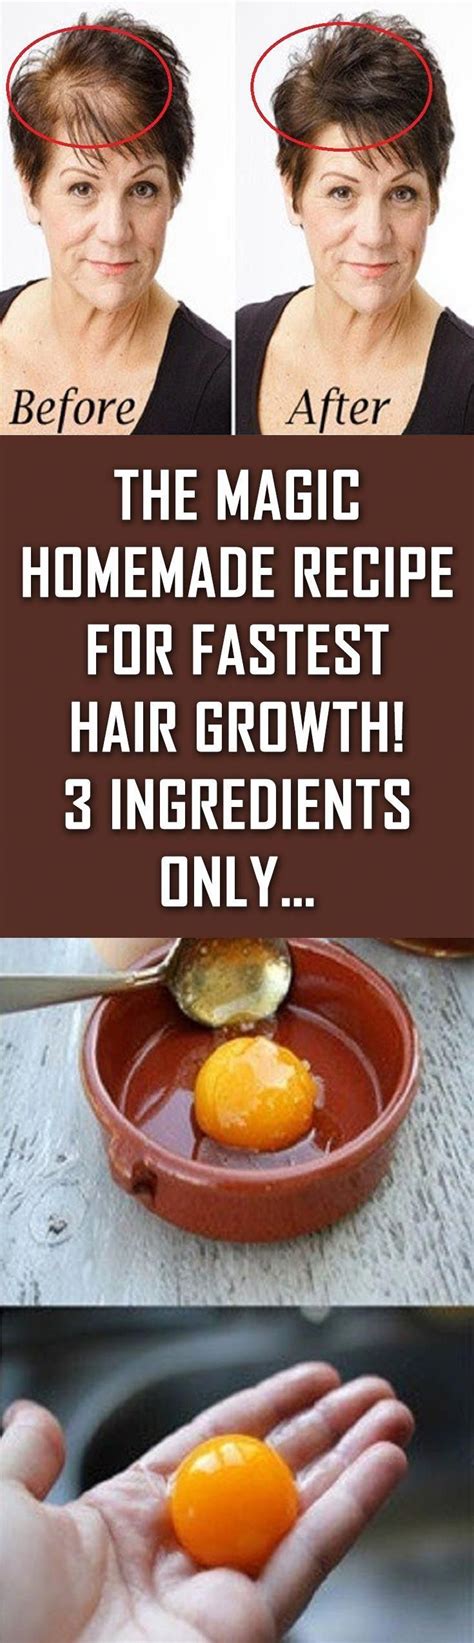 Want stronger and healthier hair? The Magic Homemade Recipe For Fastest Hair Growth! 3 ...